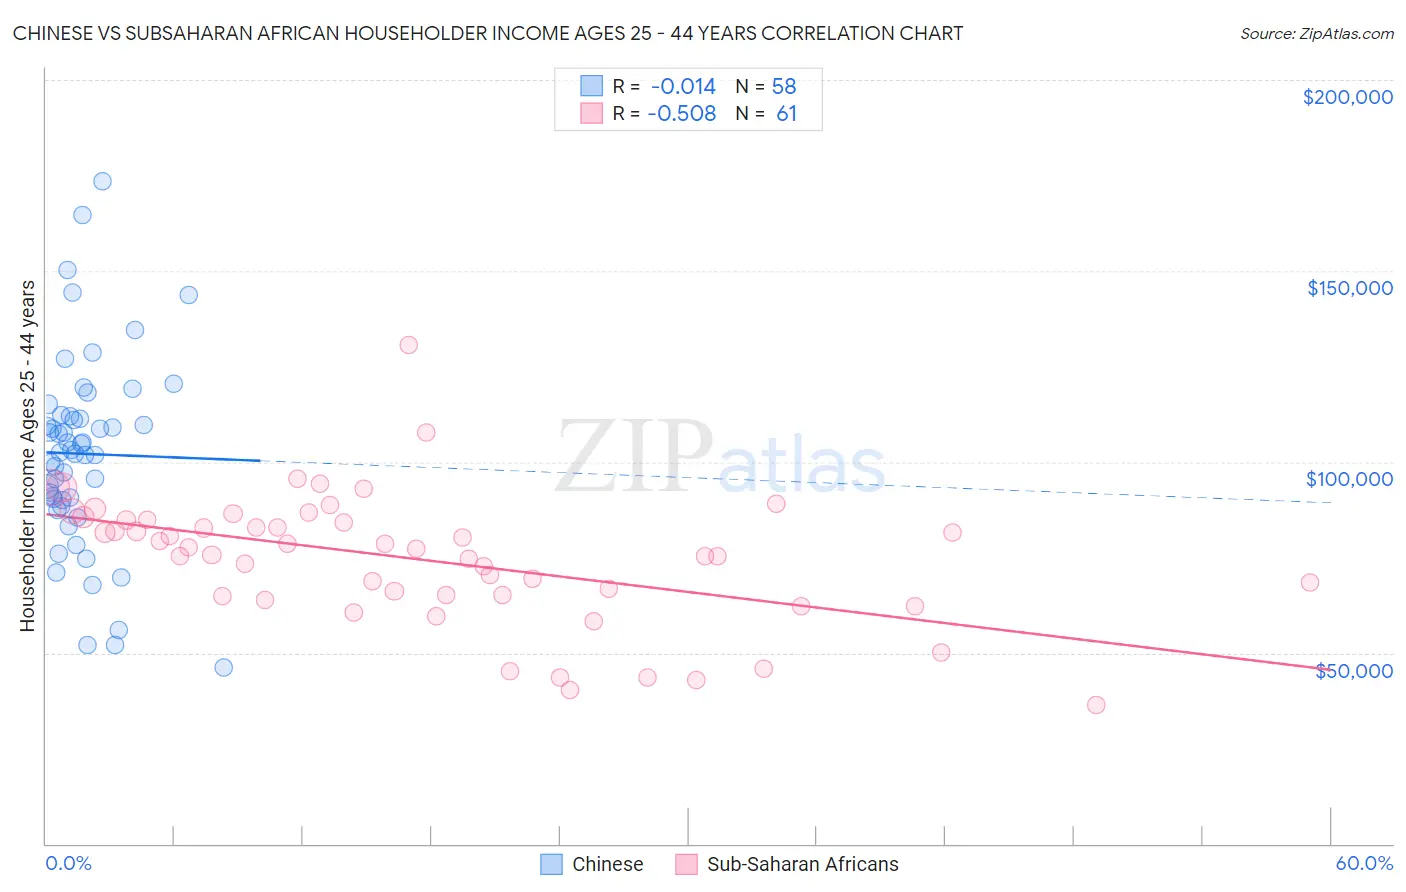 Chinese vs Subsaharan African Householder Income Ages 25 - 44 years